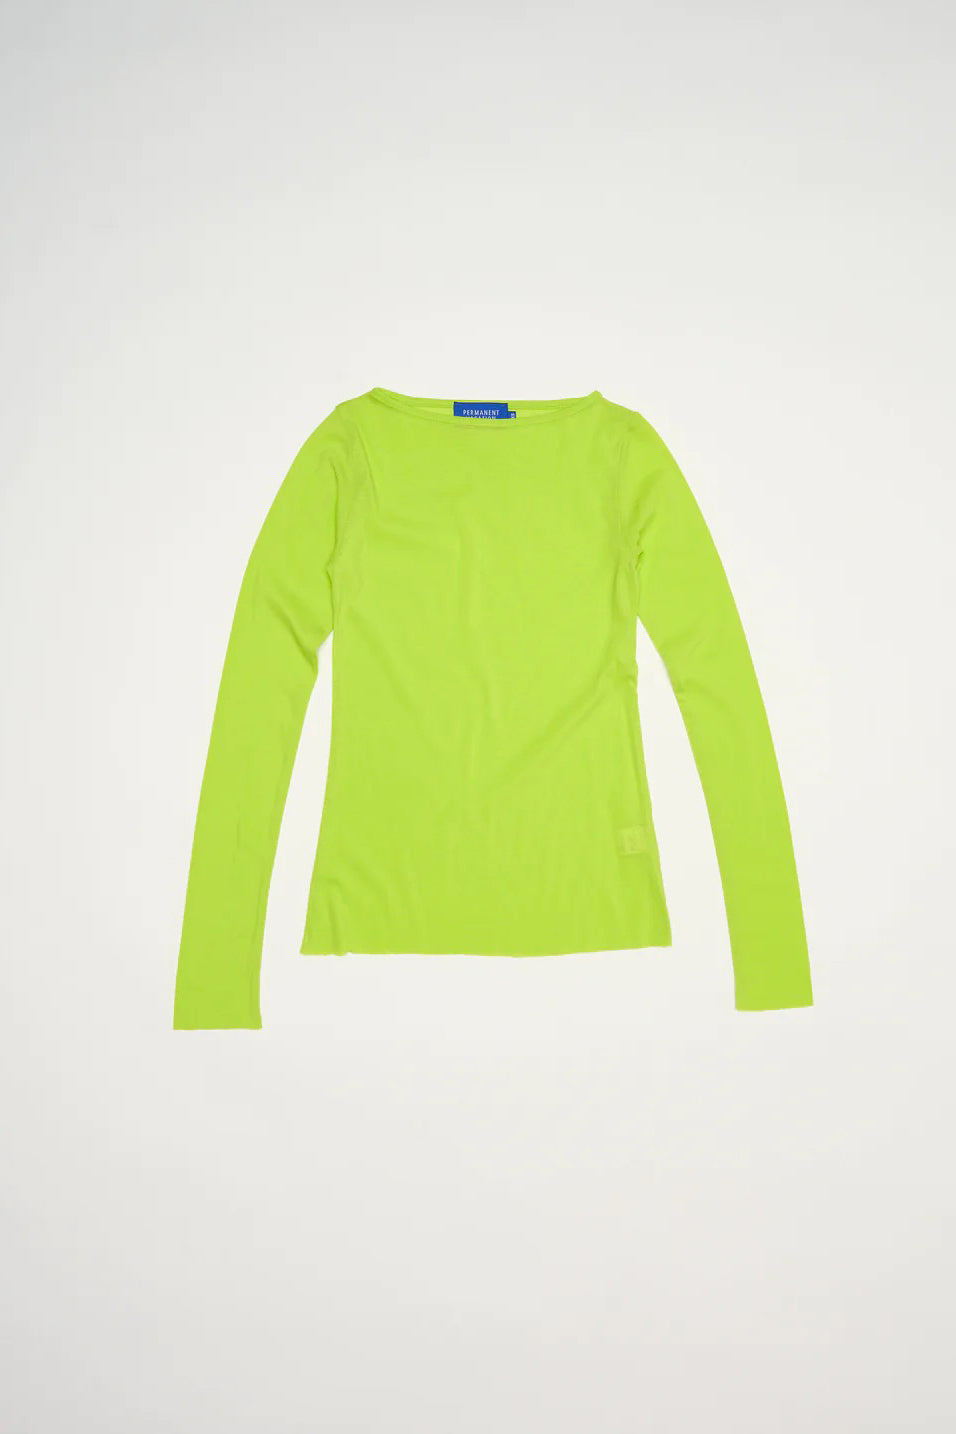 PV Connection Top // Acid Green